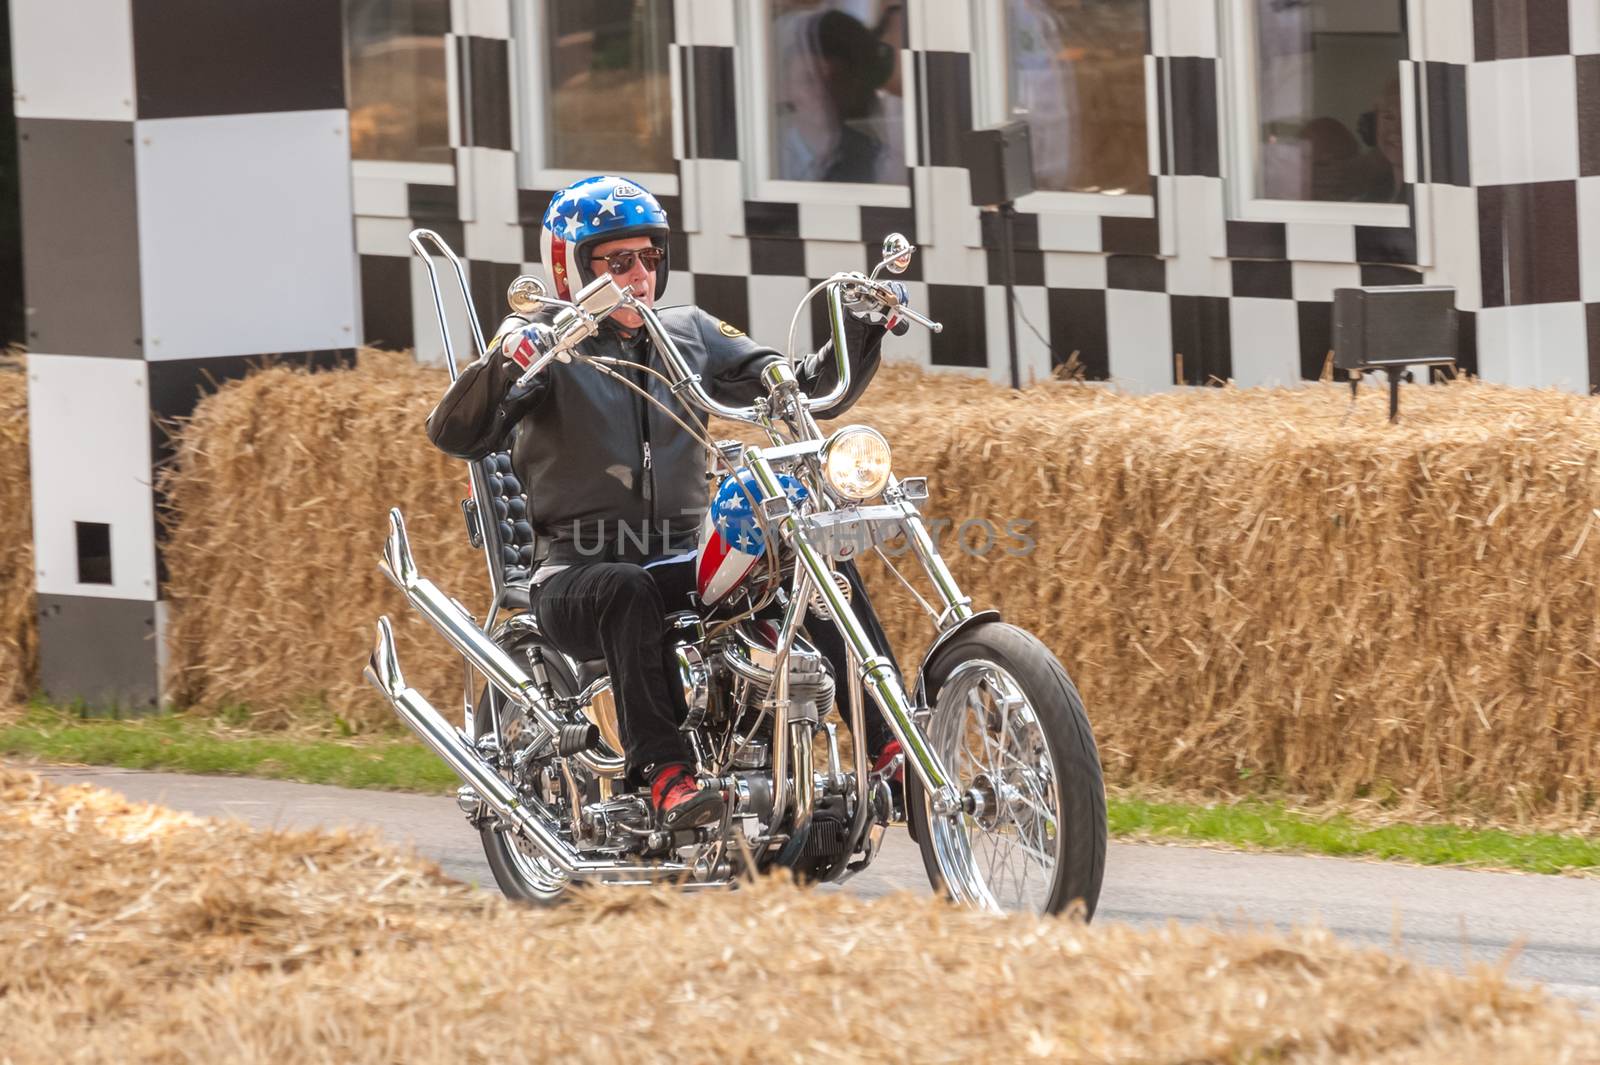 Goodwood, UK - July 13, 2013: Hollywood actor Peter Fonda on an iconic Captain America chopper motorcycle from the movie, Easy Rider at the Festival of Speed event, held at Goodwood, UK